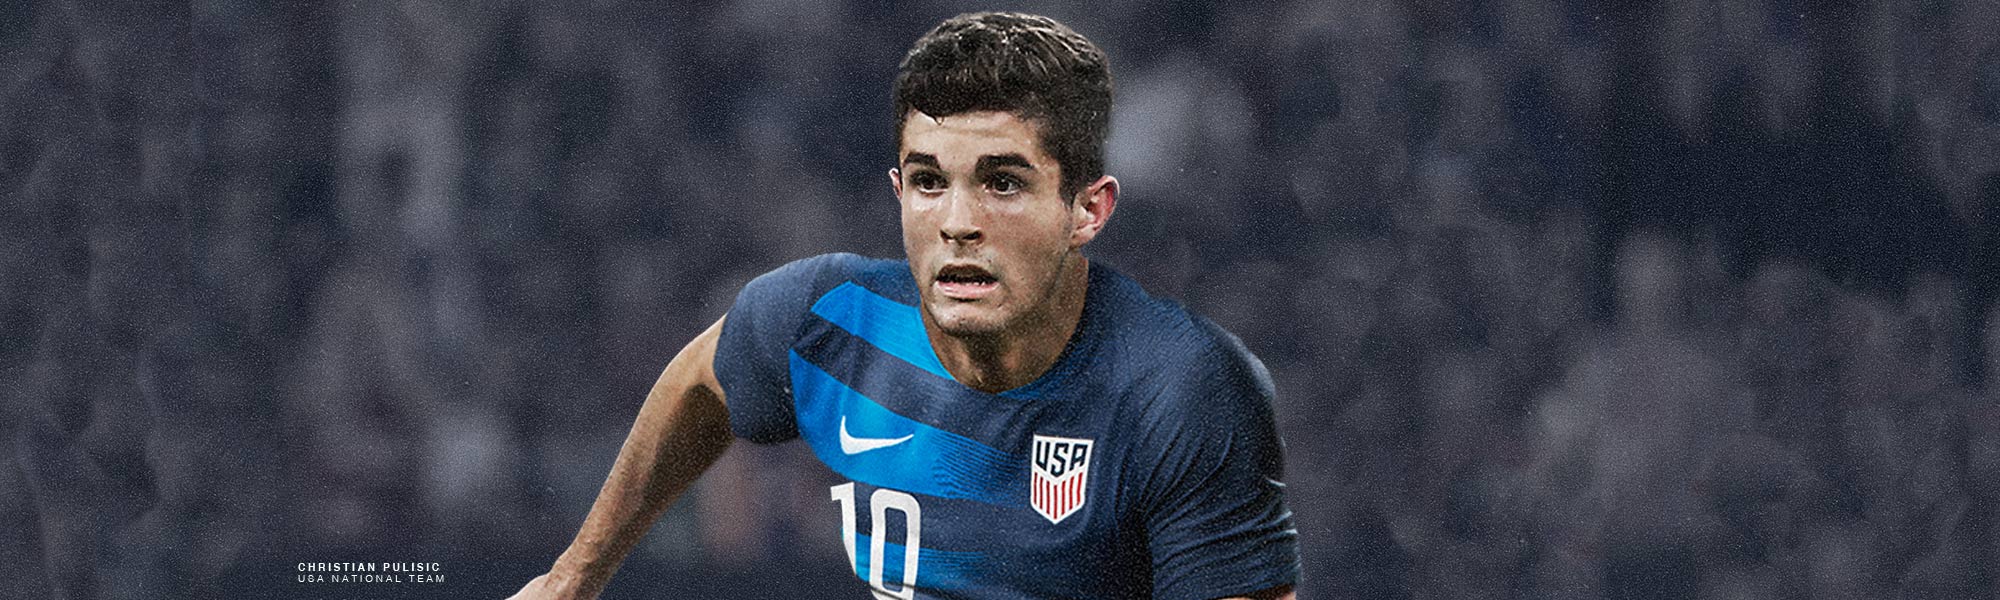 pulisic national team jersey